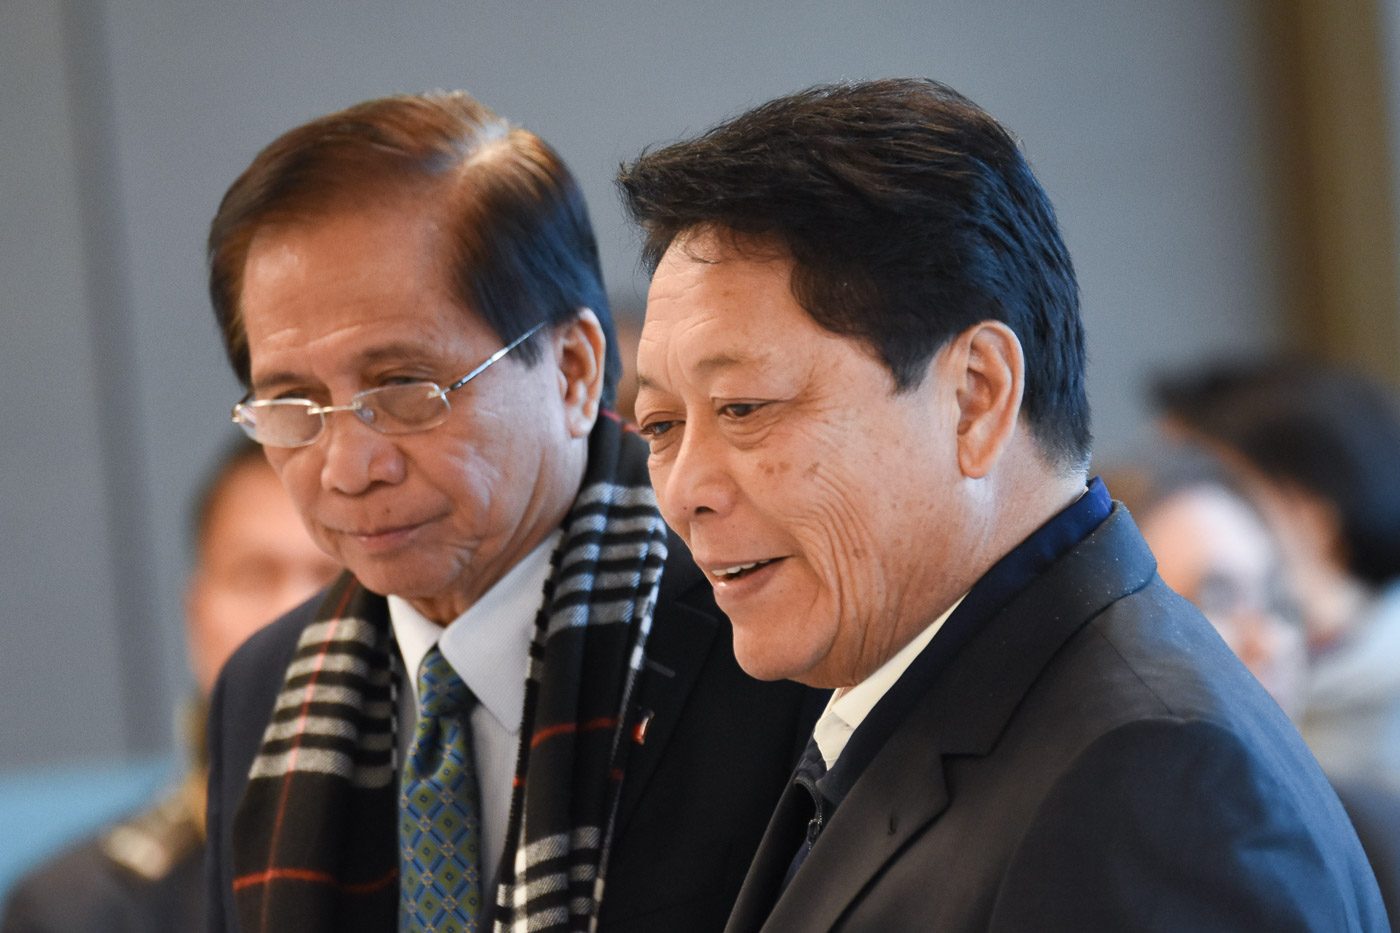 Gov’t not giving up on Dec 10 bilateral ceasefire deal